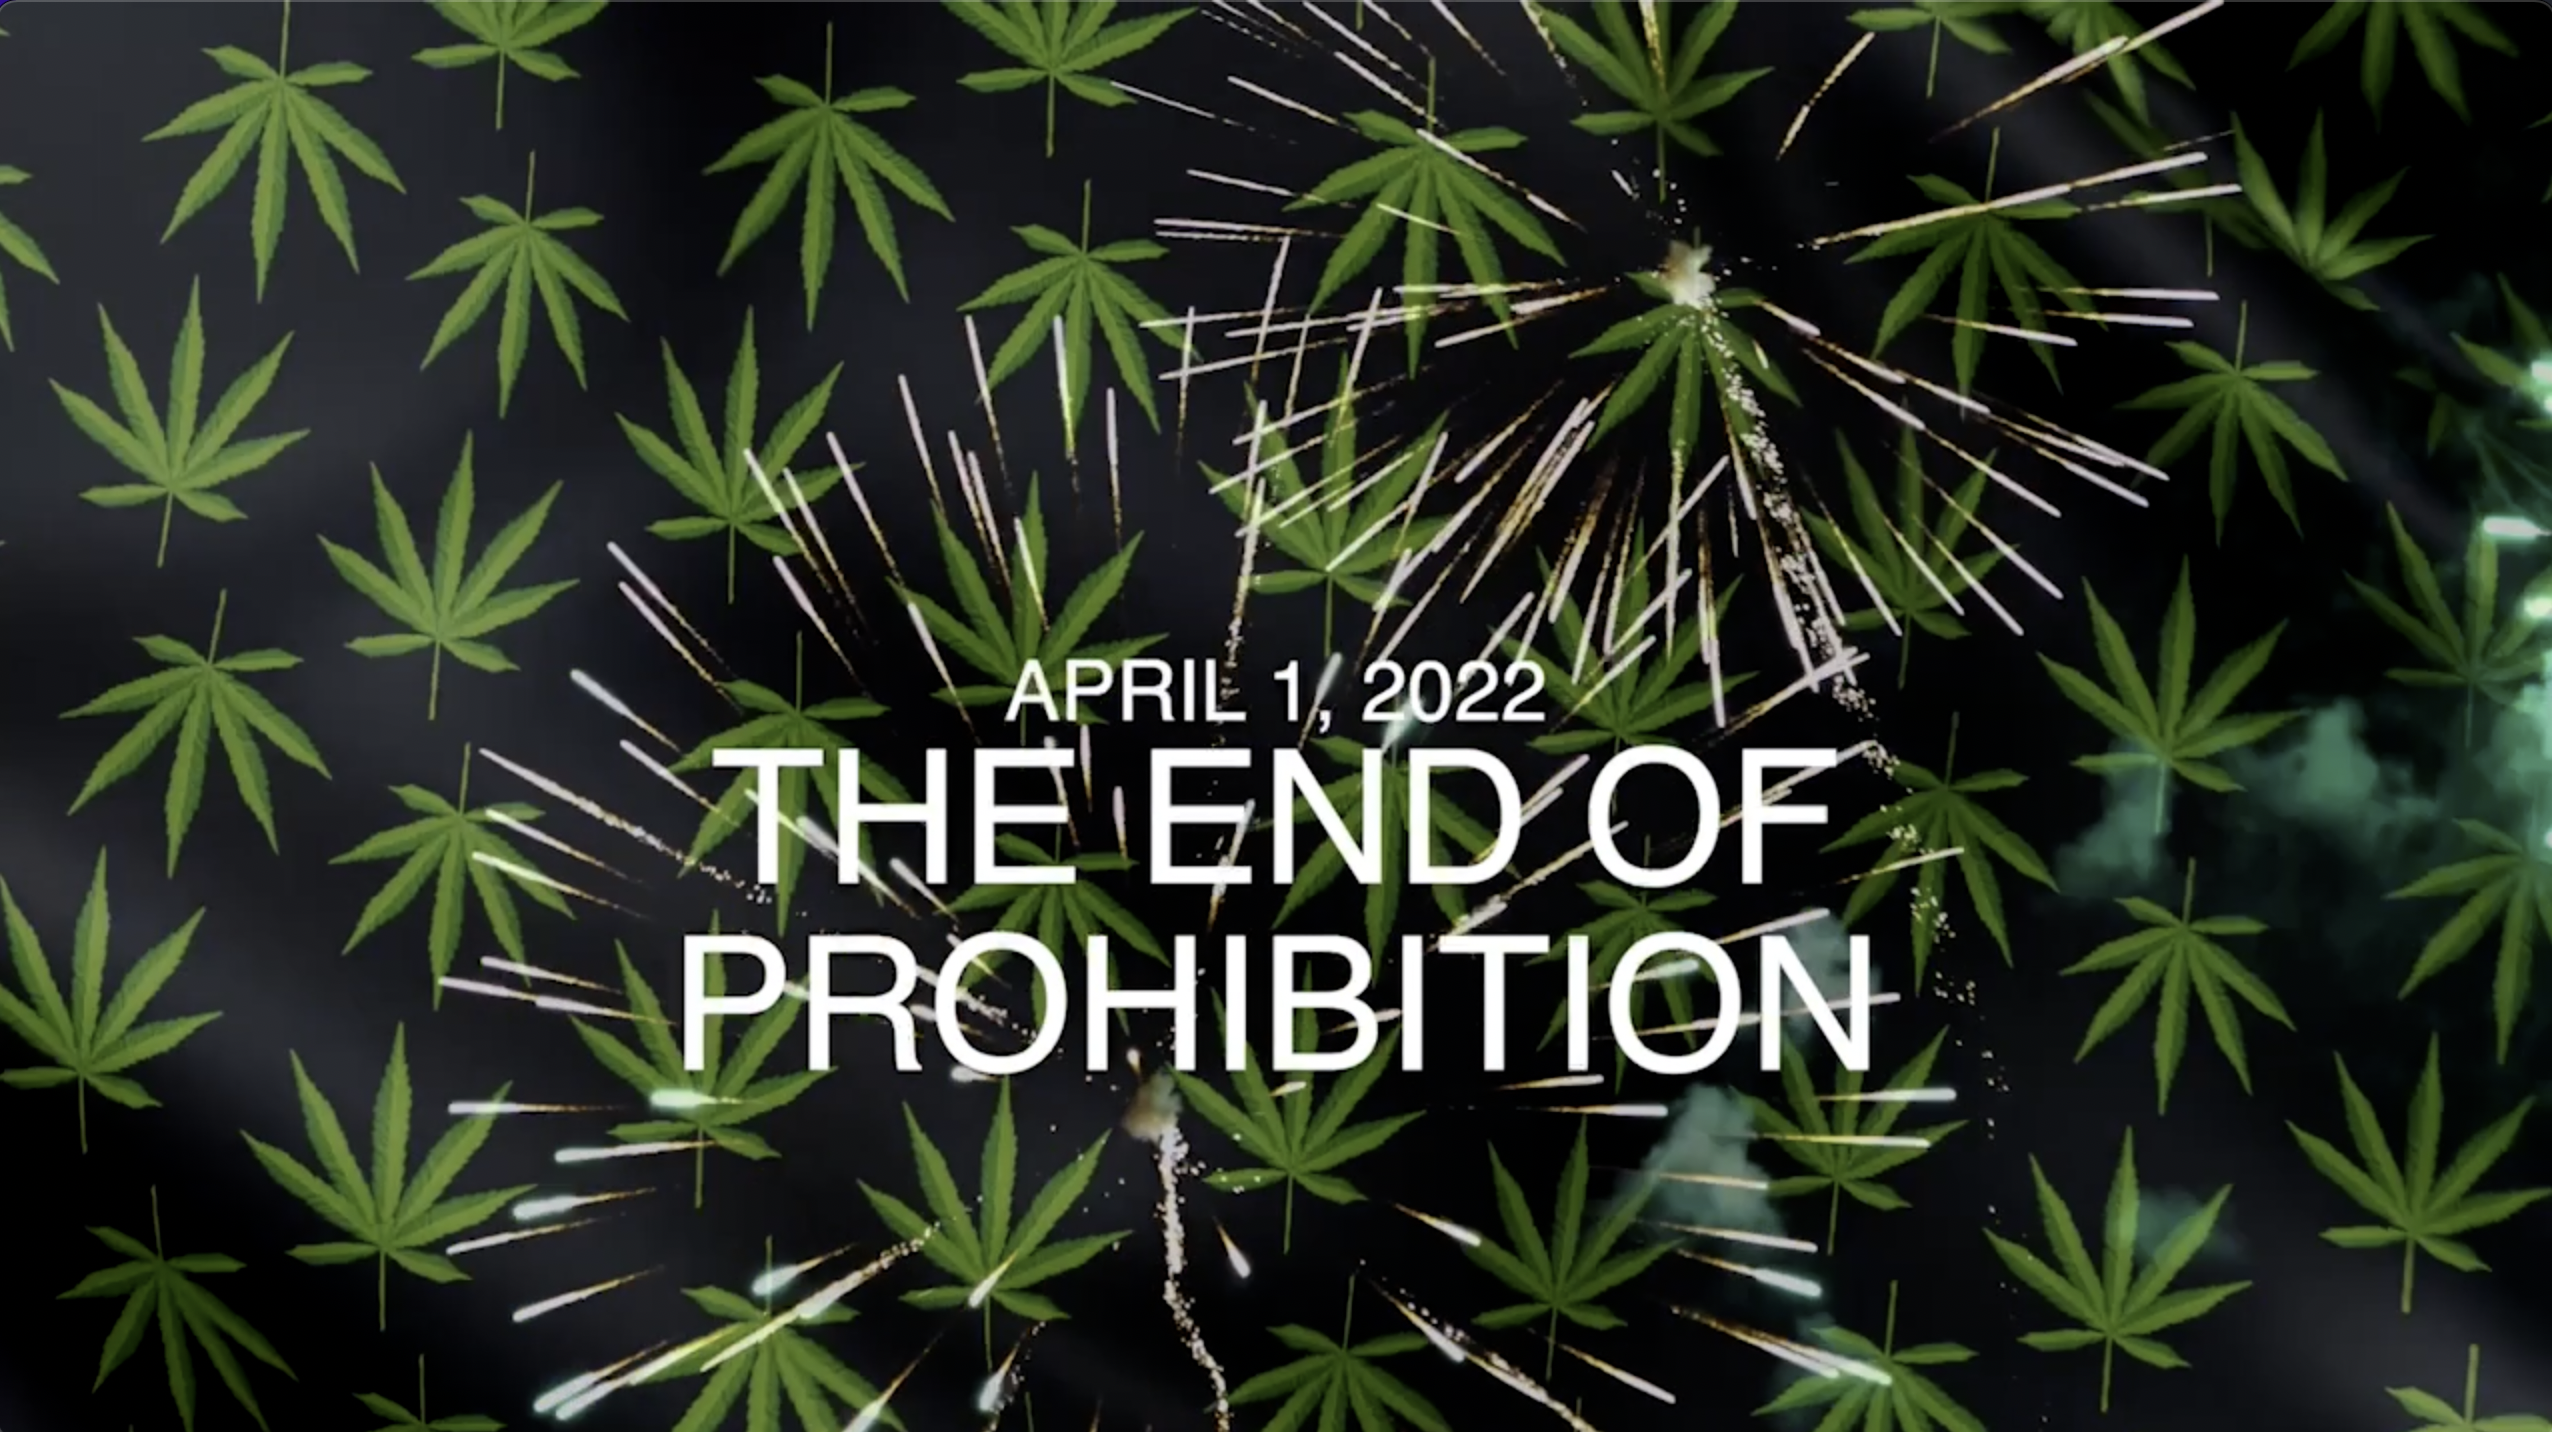 The end of prohibition